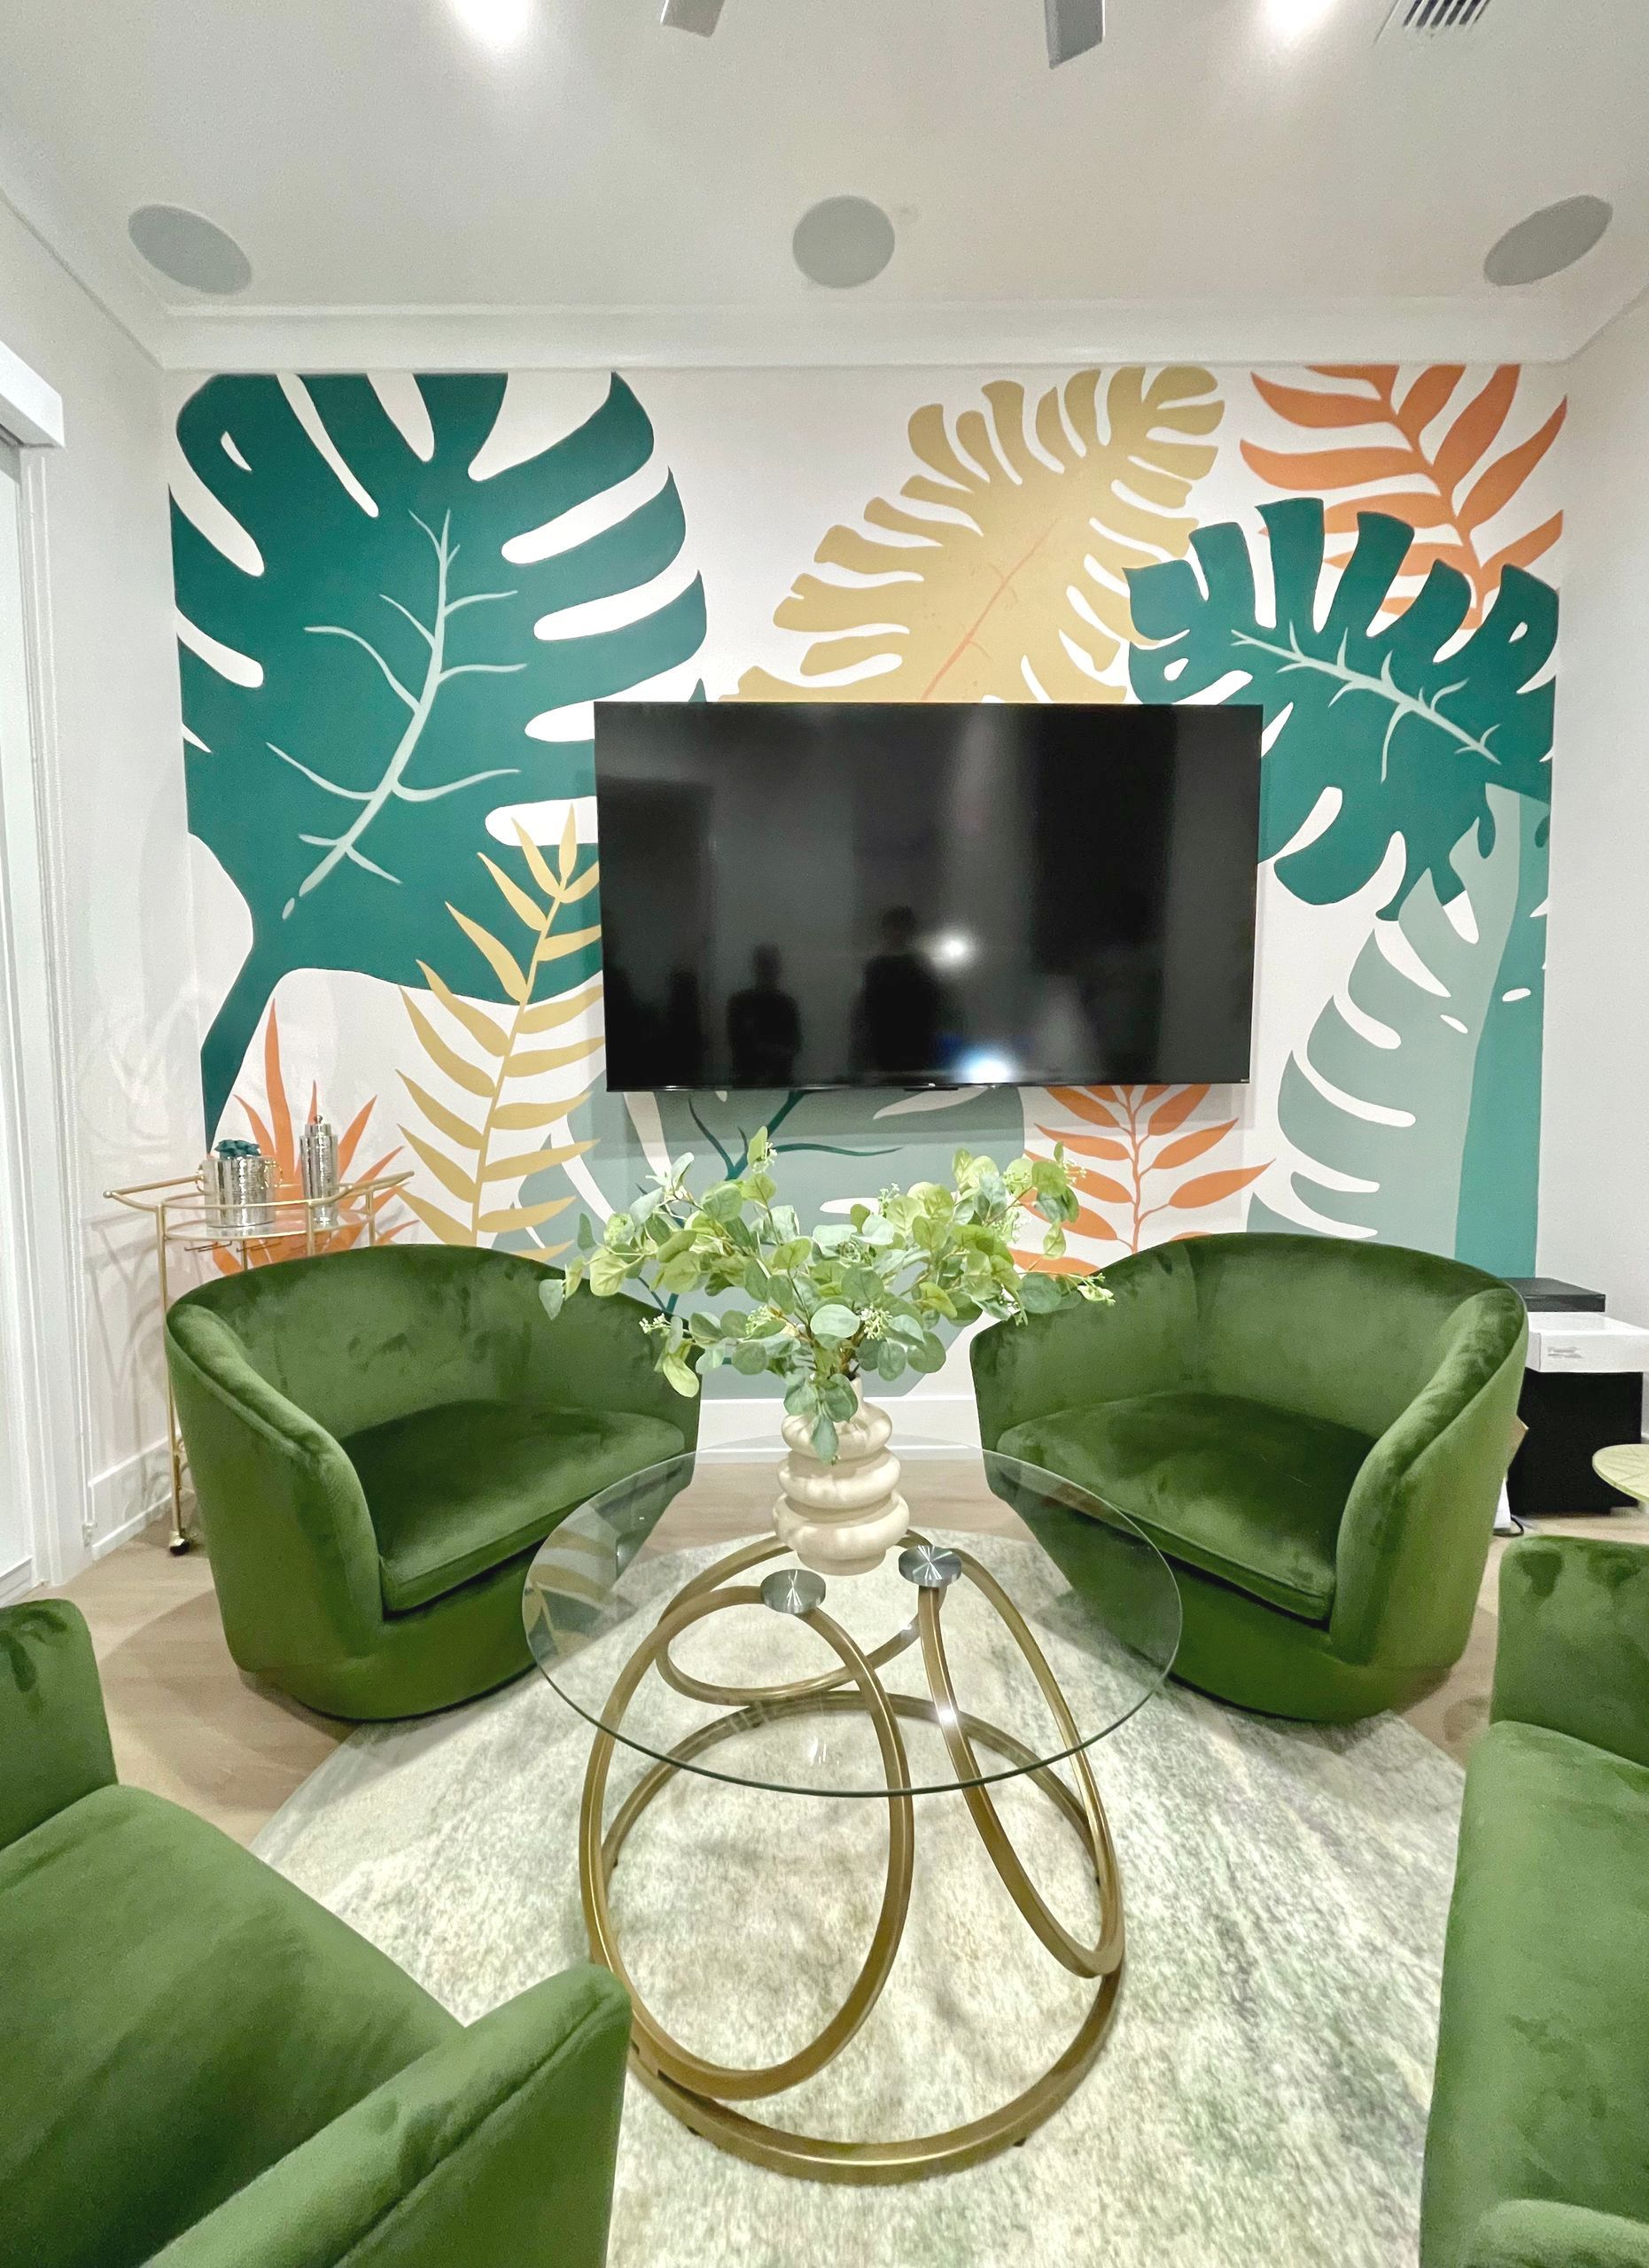 Jungle leaves accent wall in the den room at the Waterway Stay Short term rental/Airbnb, Palm Coast, Florida.